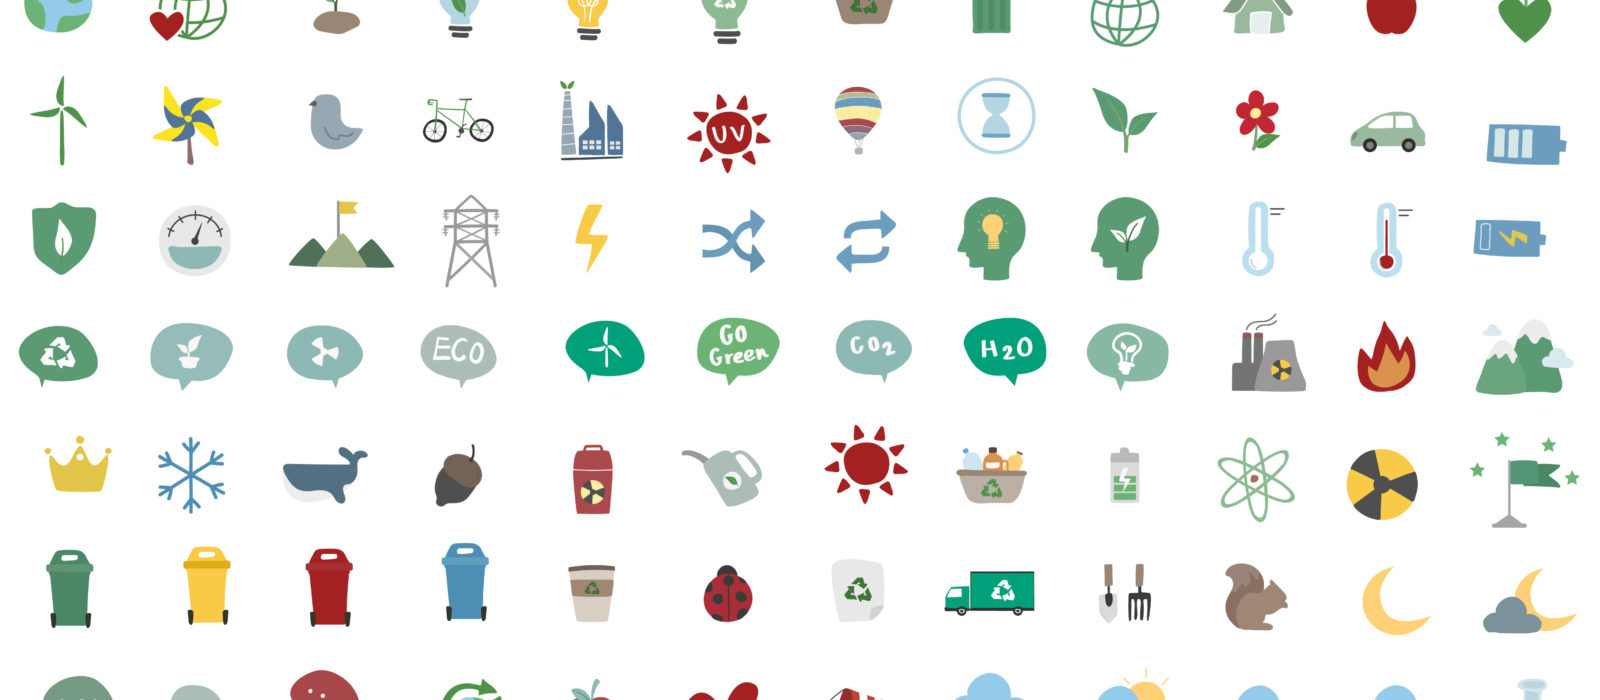  A number of various different icons, symbolising topics related to the environment and sustainability.